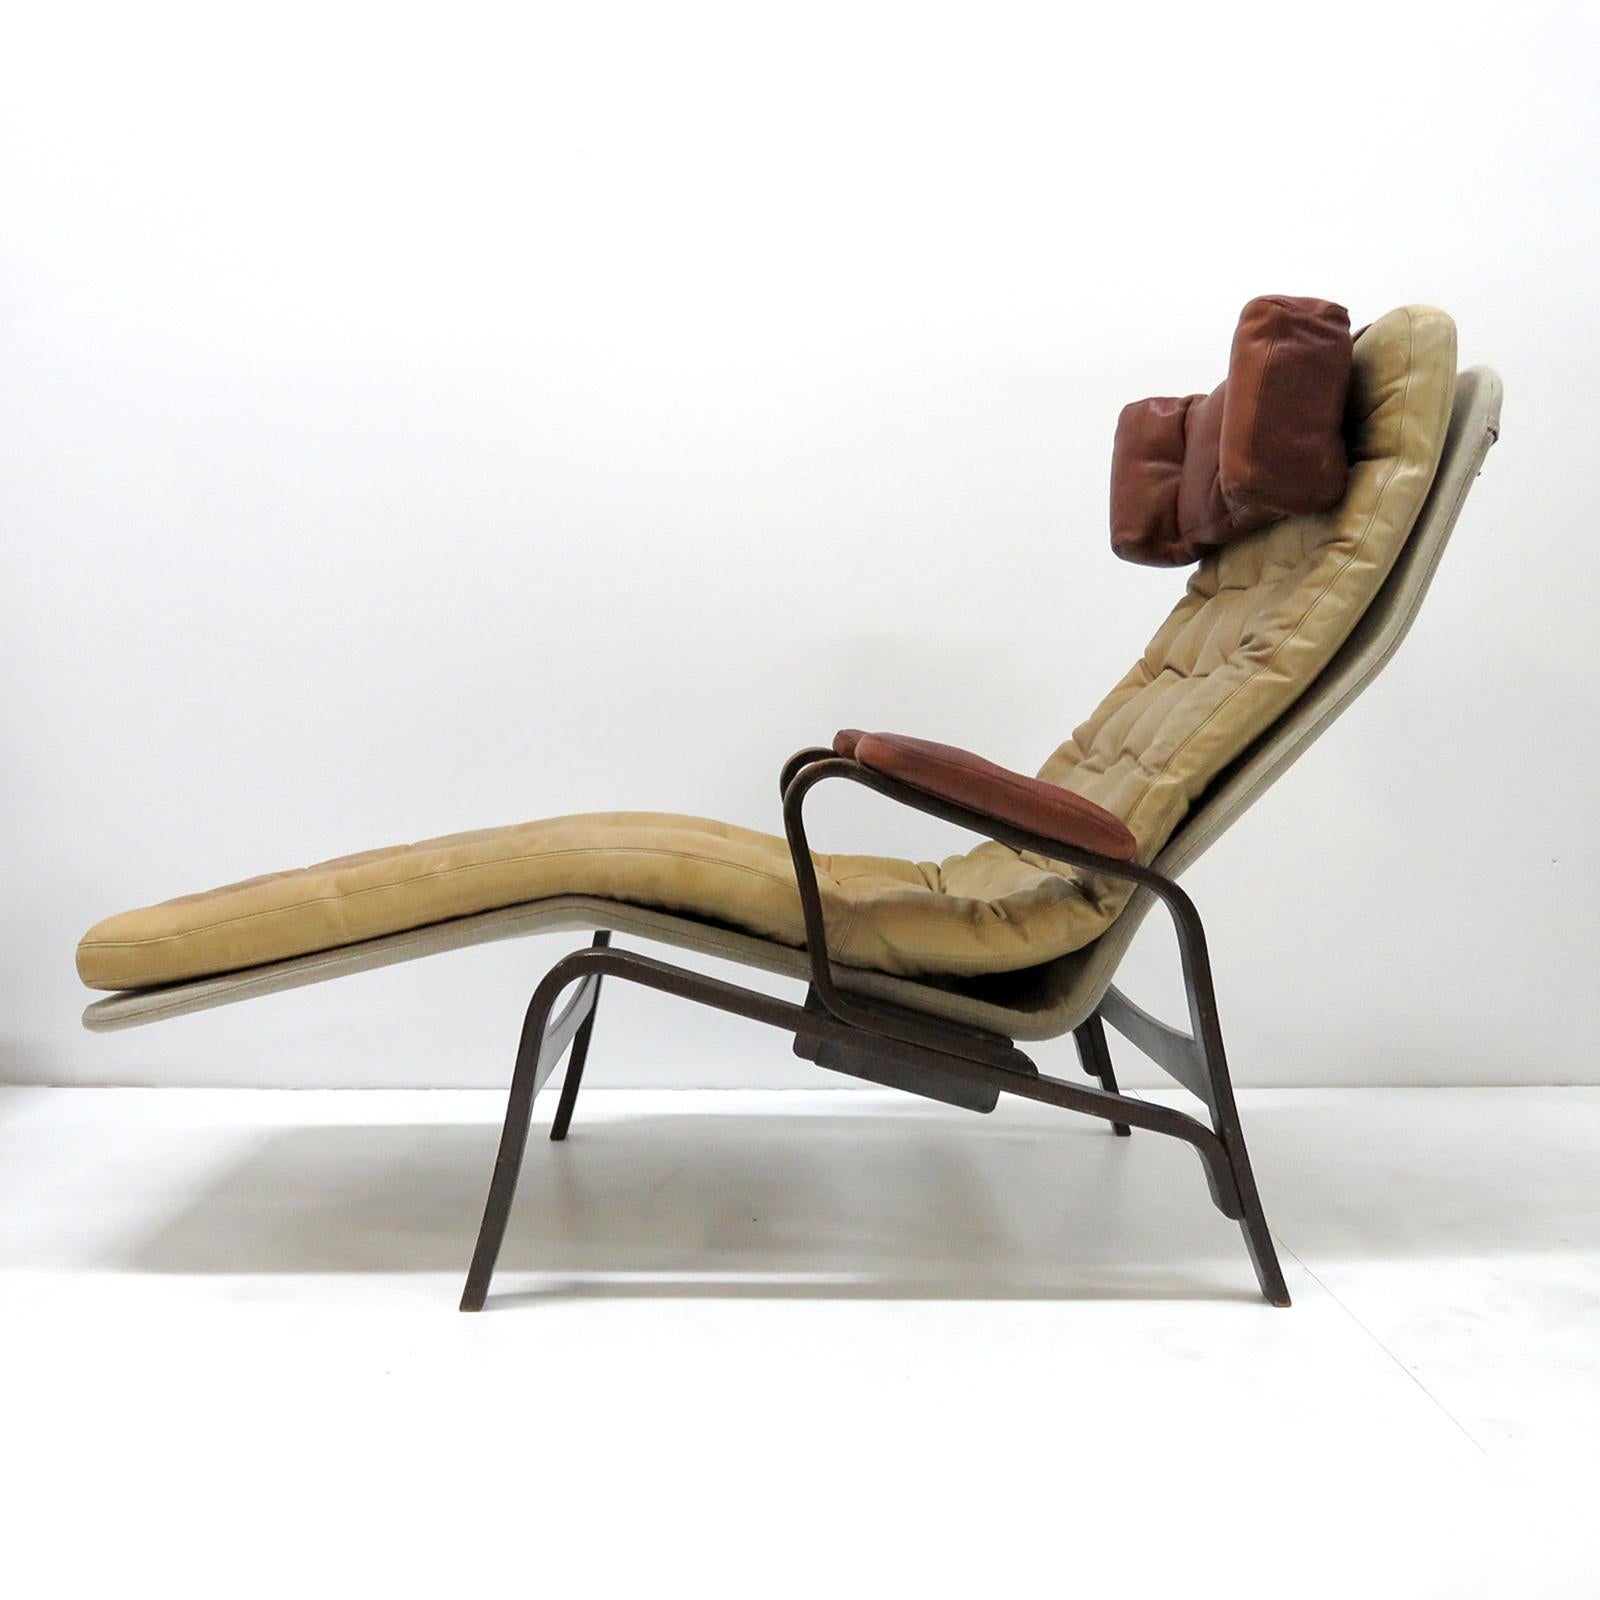 Wonderful reclining lounge chair/chaise by Sam Larsson for DUX, 1970, in camel colored leather on a canvas covered metal frame. Headrest and arm cushions in cognac colored leather on a dark-stained bentwood frame, marked with DUX print on the back